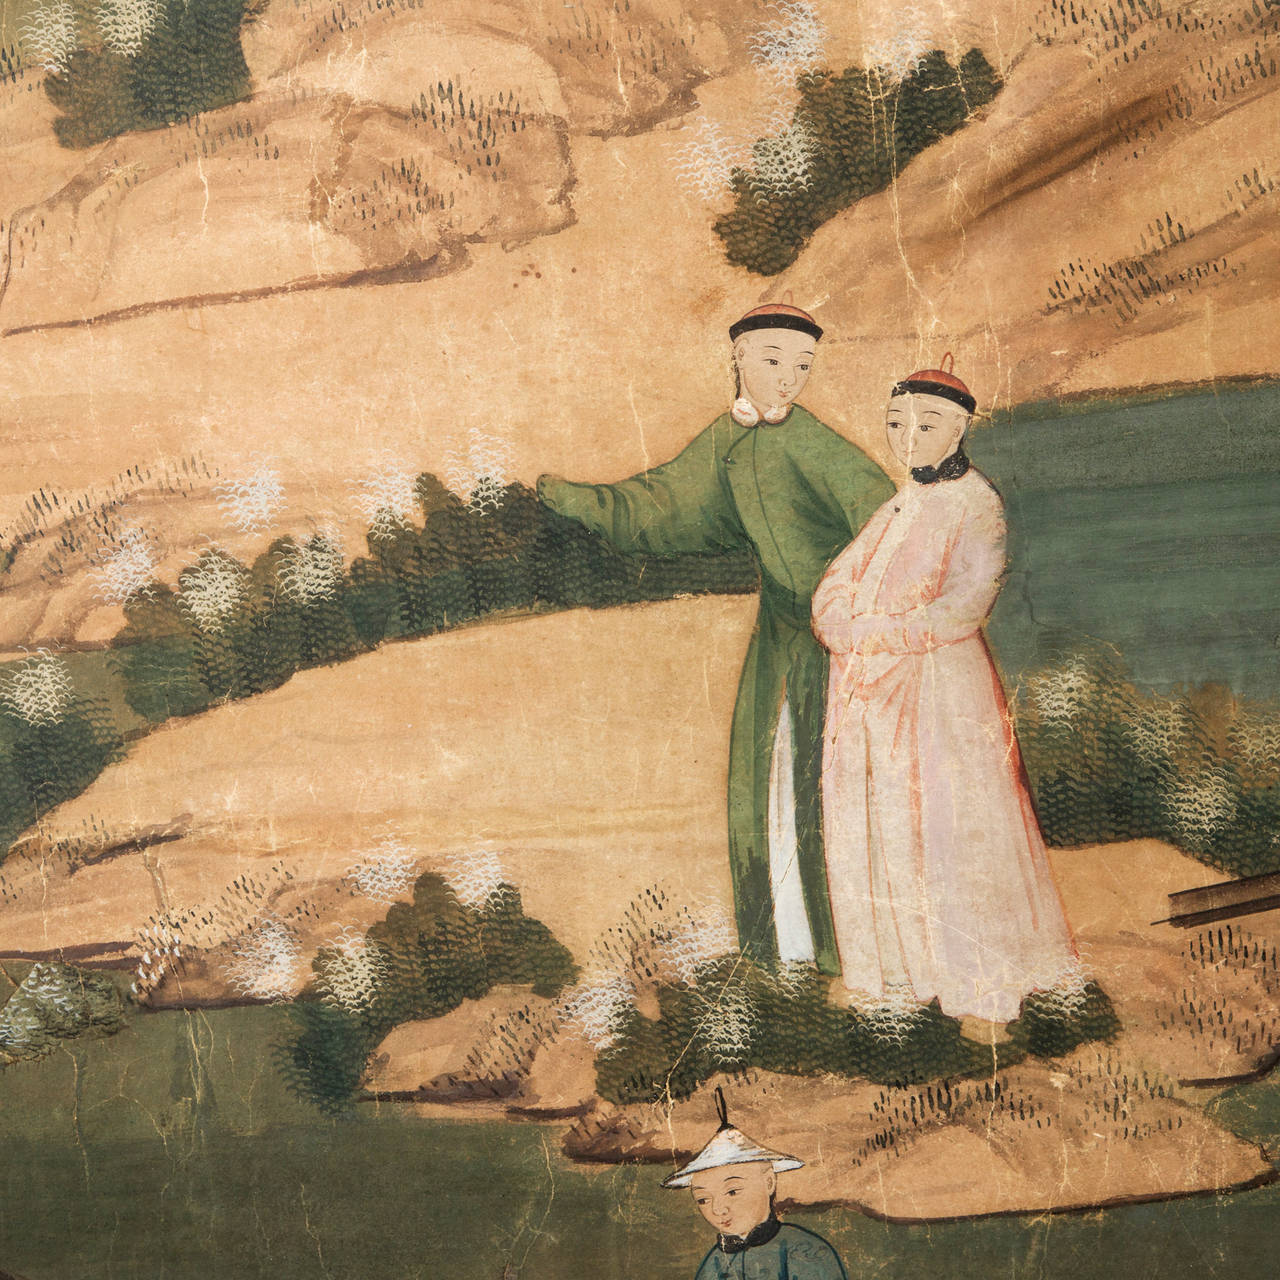 Two wallpaper fragments laid down on canvas, depicting pavilions and figures by a river against a mountainous landscape.

Gouache on paper

China, 18th Century

Height: 84,5 cm (33-1/4 in.) - Width: 180 cm (70-7/8 in.)
Height: 88 cm (34-1/2